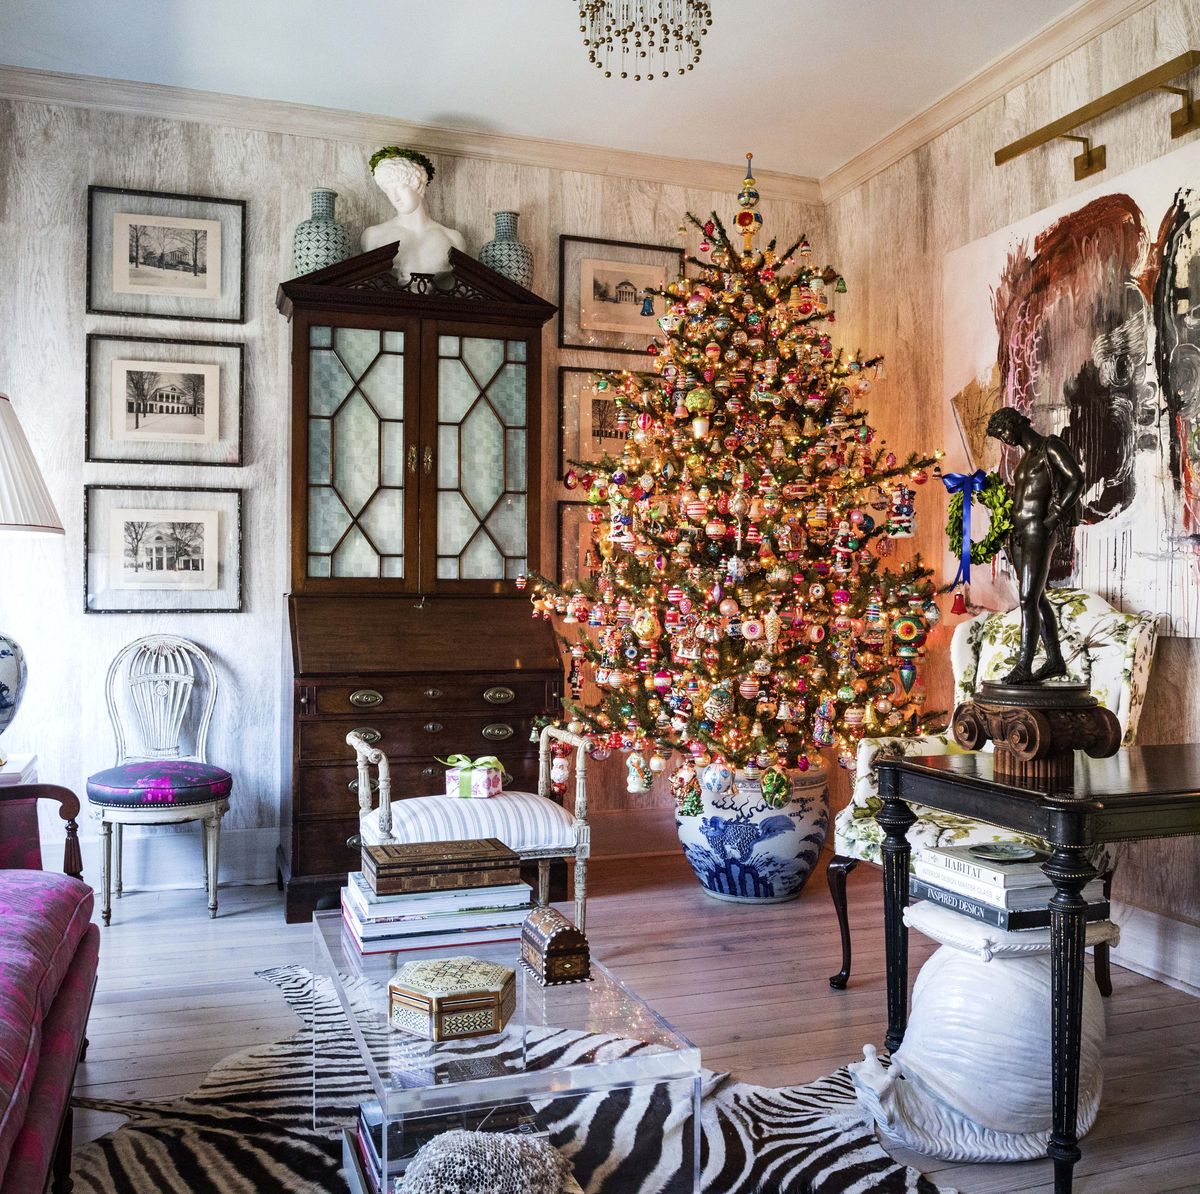 This Year's Holiday Glam Apartment Decor- My Life as Lauren Blog